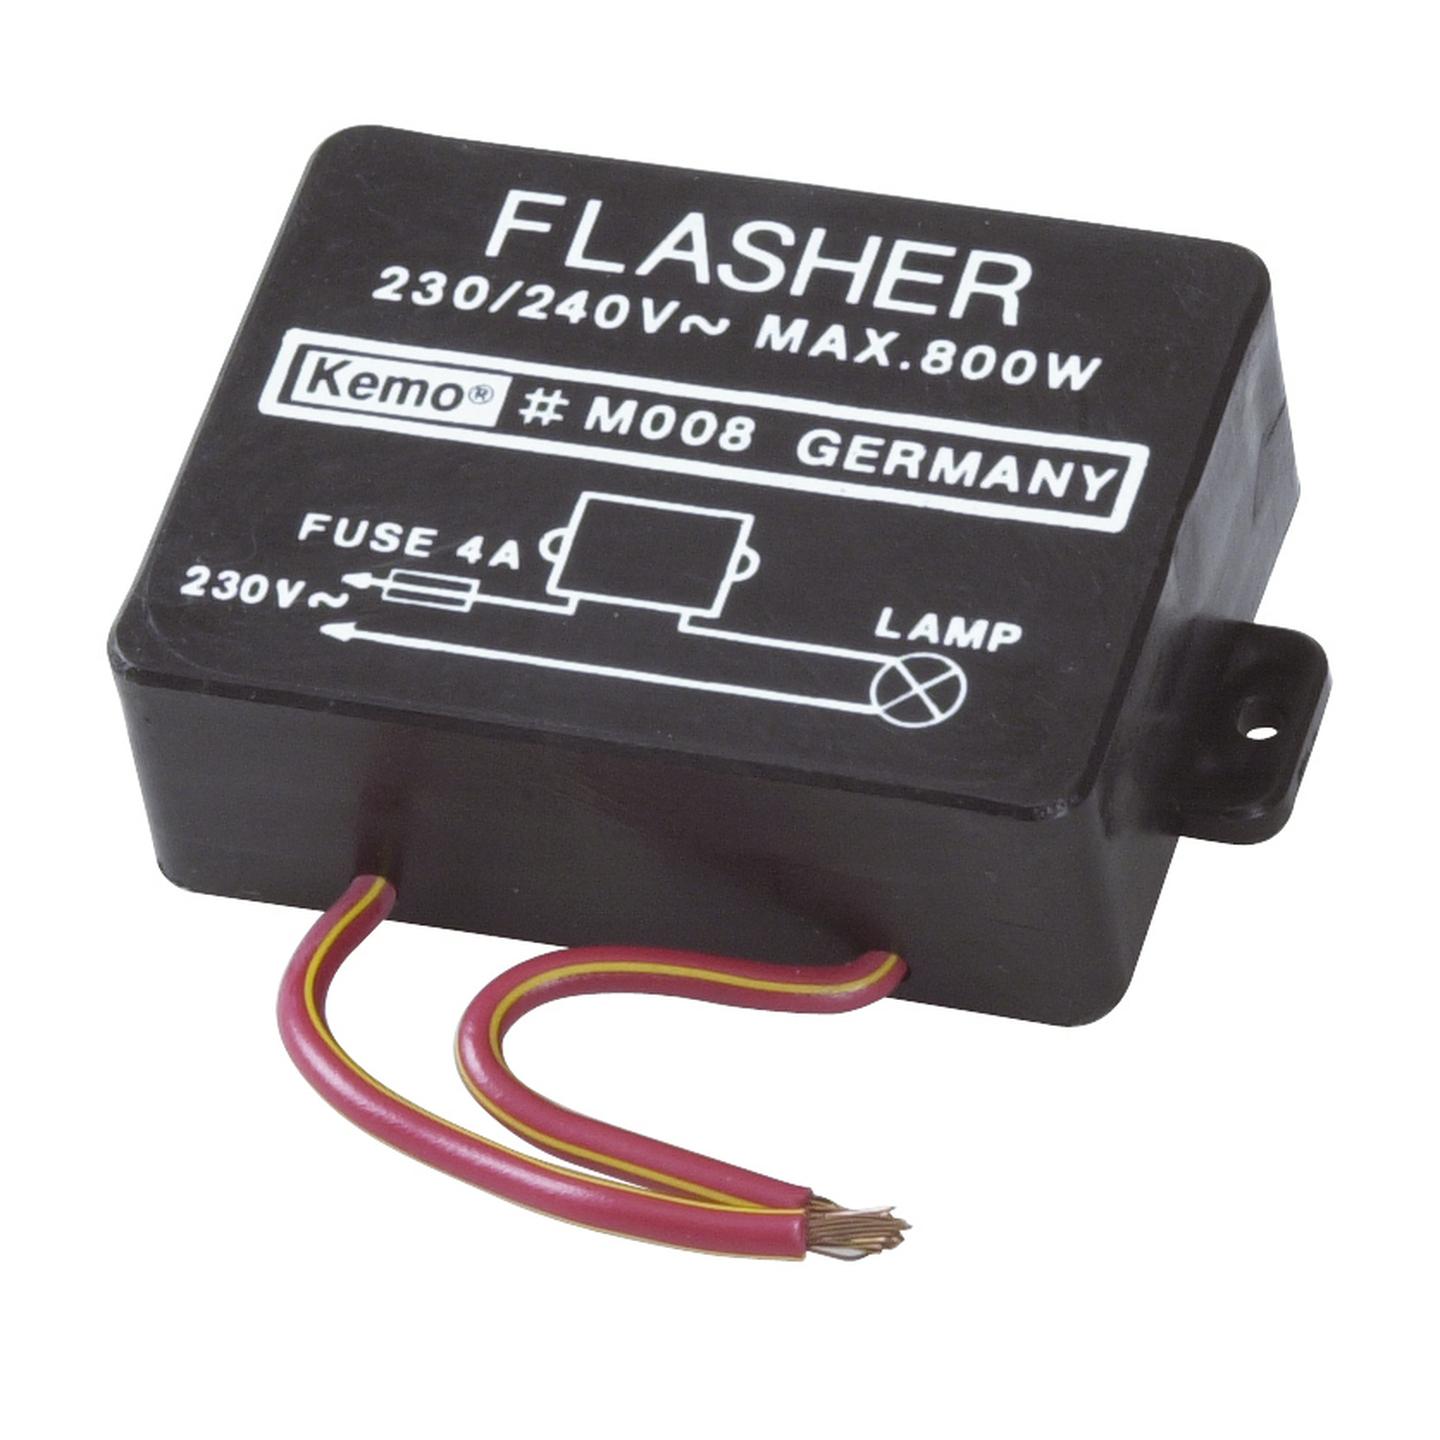 Incandescent Lamp Flasher Fixed